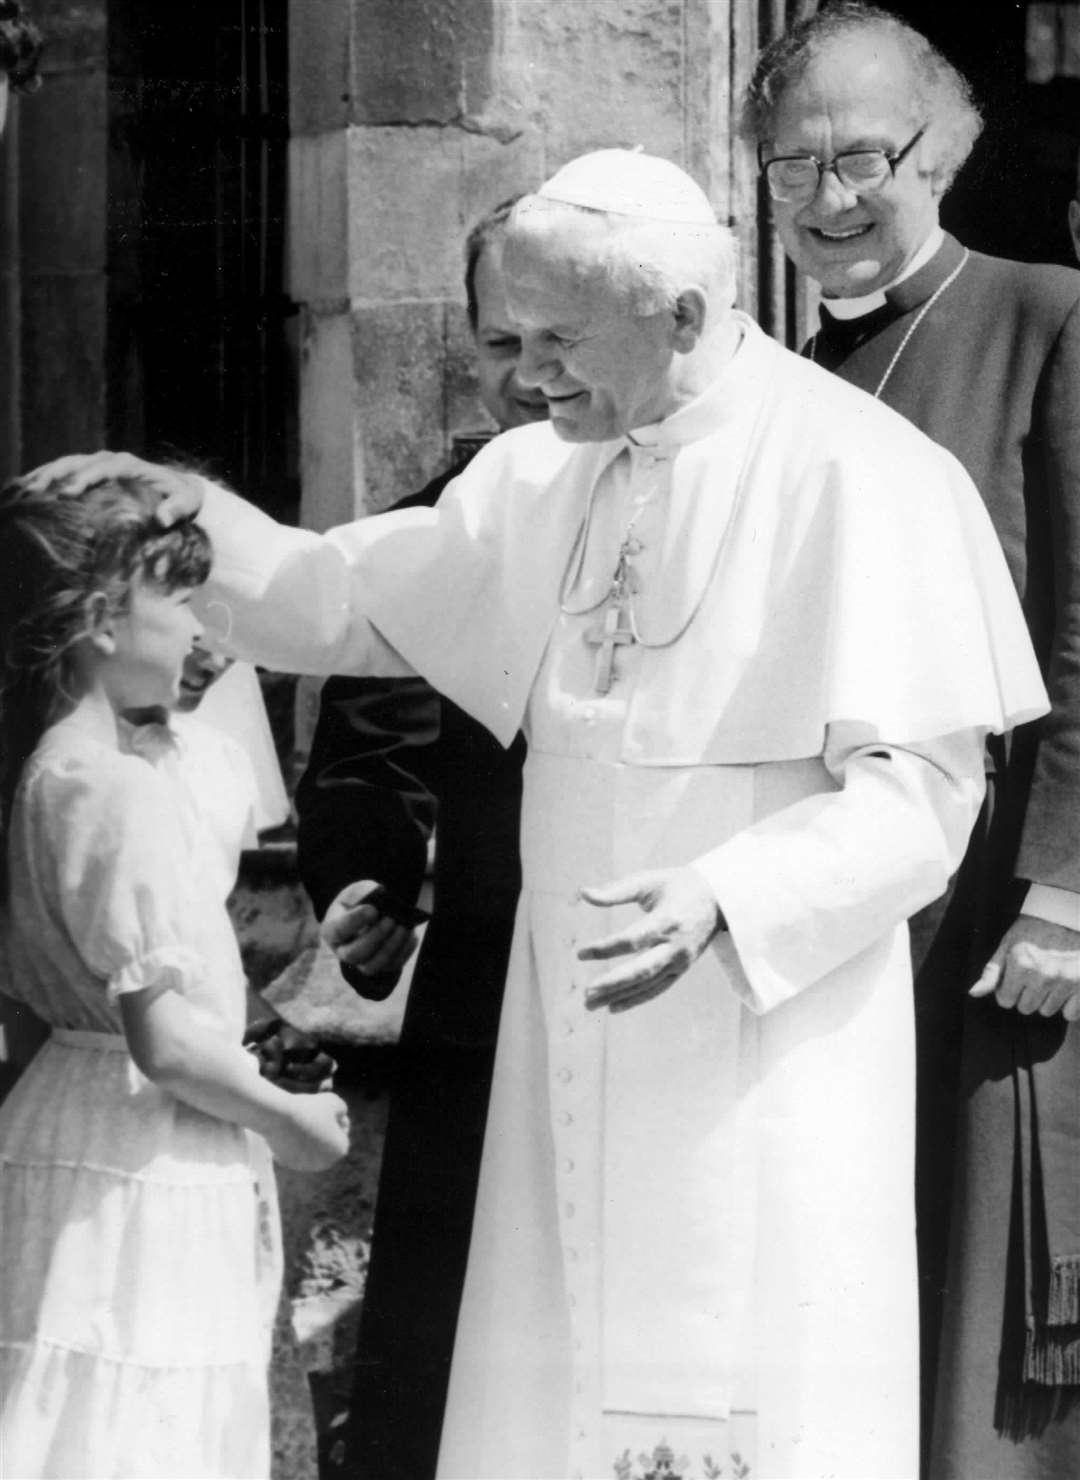 Pope John Paul II blesses a young girl outside the Cathedral as Archbishop of Canterbury Dr Robert Runcie watches on in June 1982